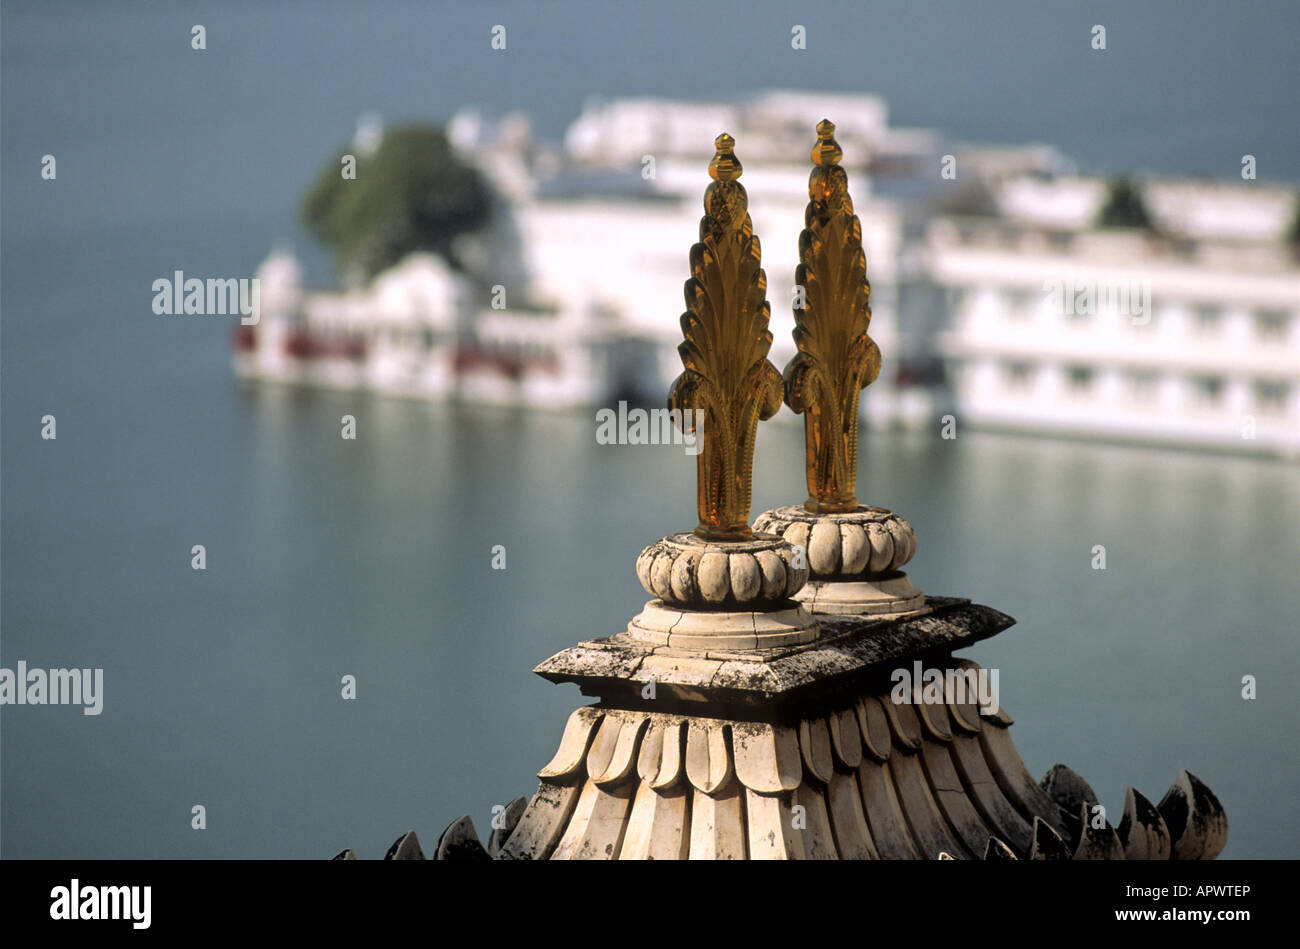 Lake Palace (luxury hotel) on the island of Jag Niwas seen from the City Palace, Udaipur IN Stock Photo